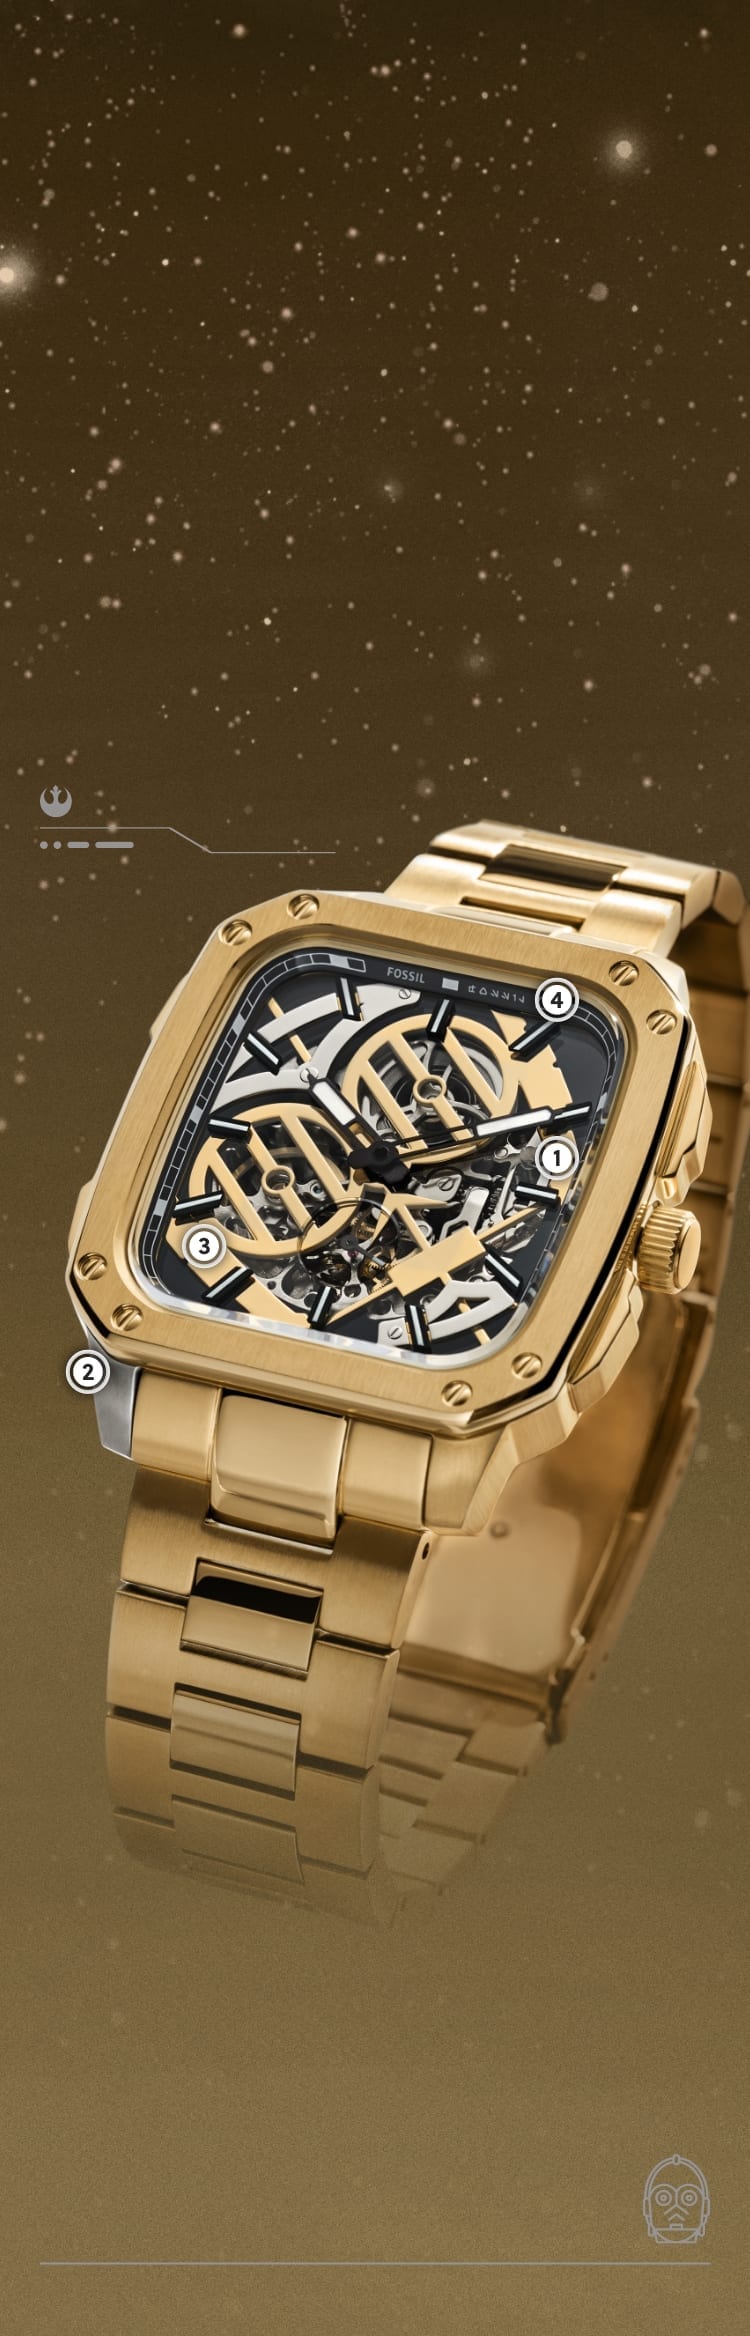 A close-up shot of a gold-tone watch with a gold-tone C-3PO face frame over an exposed automatic movement